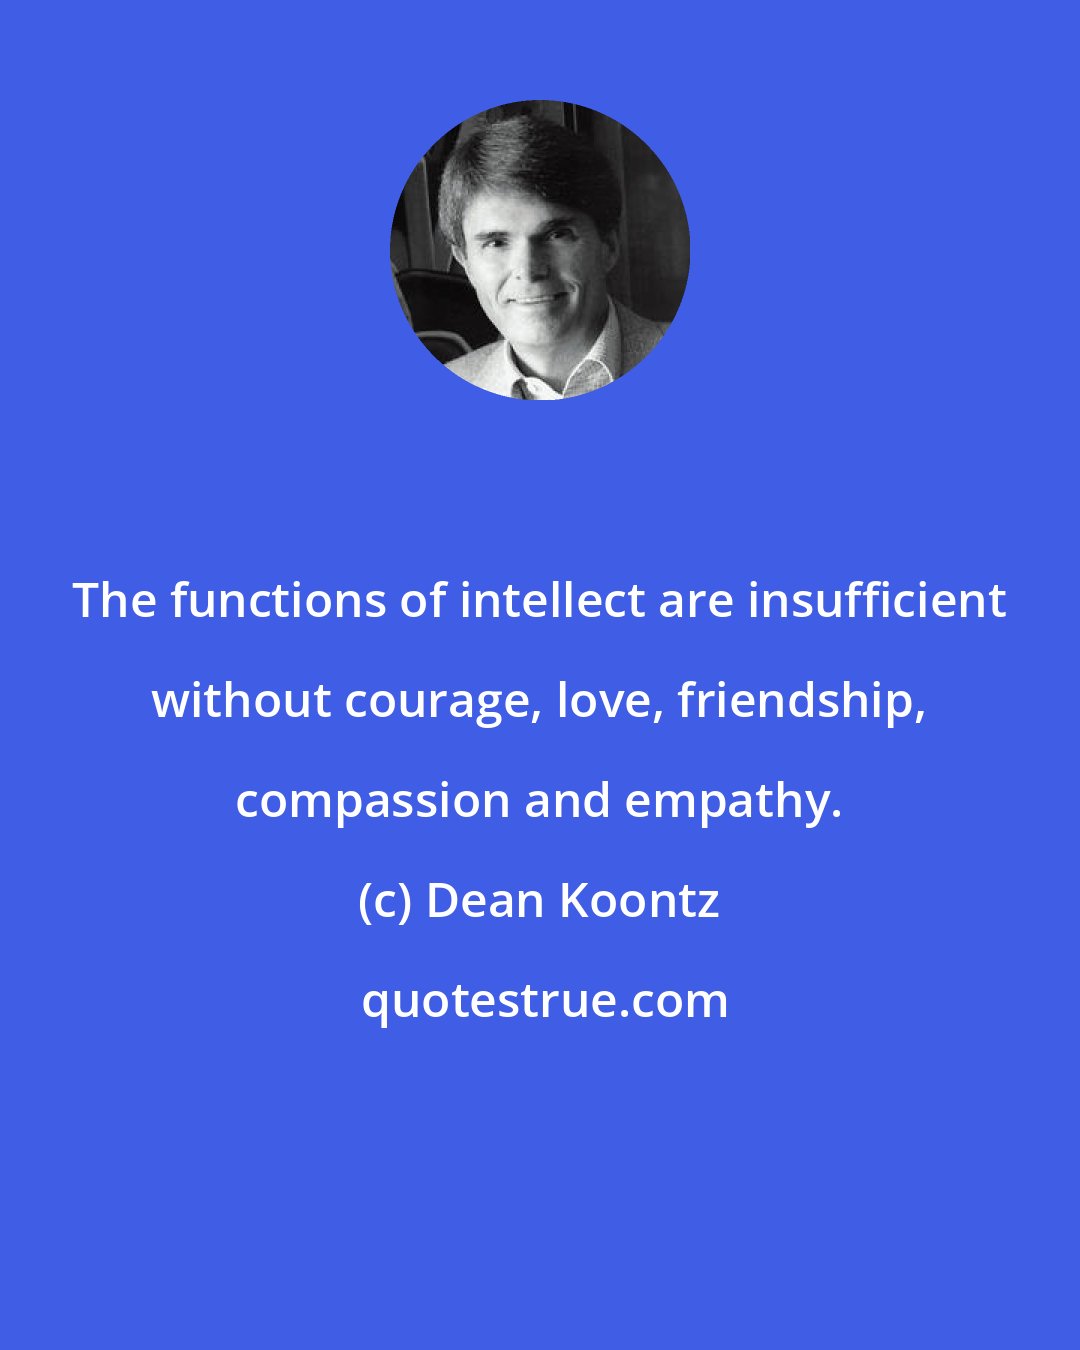 Dean Koontz: The functions of intellect are insufficient without courage, love, friendship, compassion and empathy.